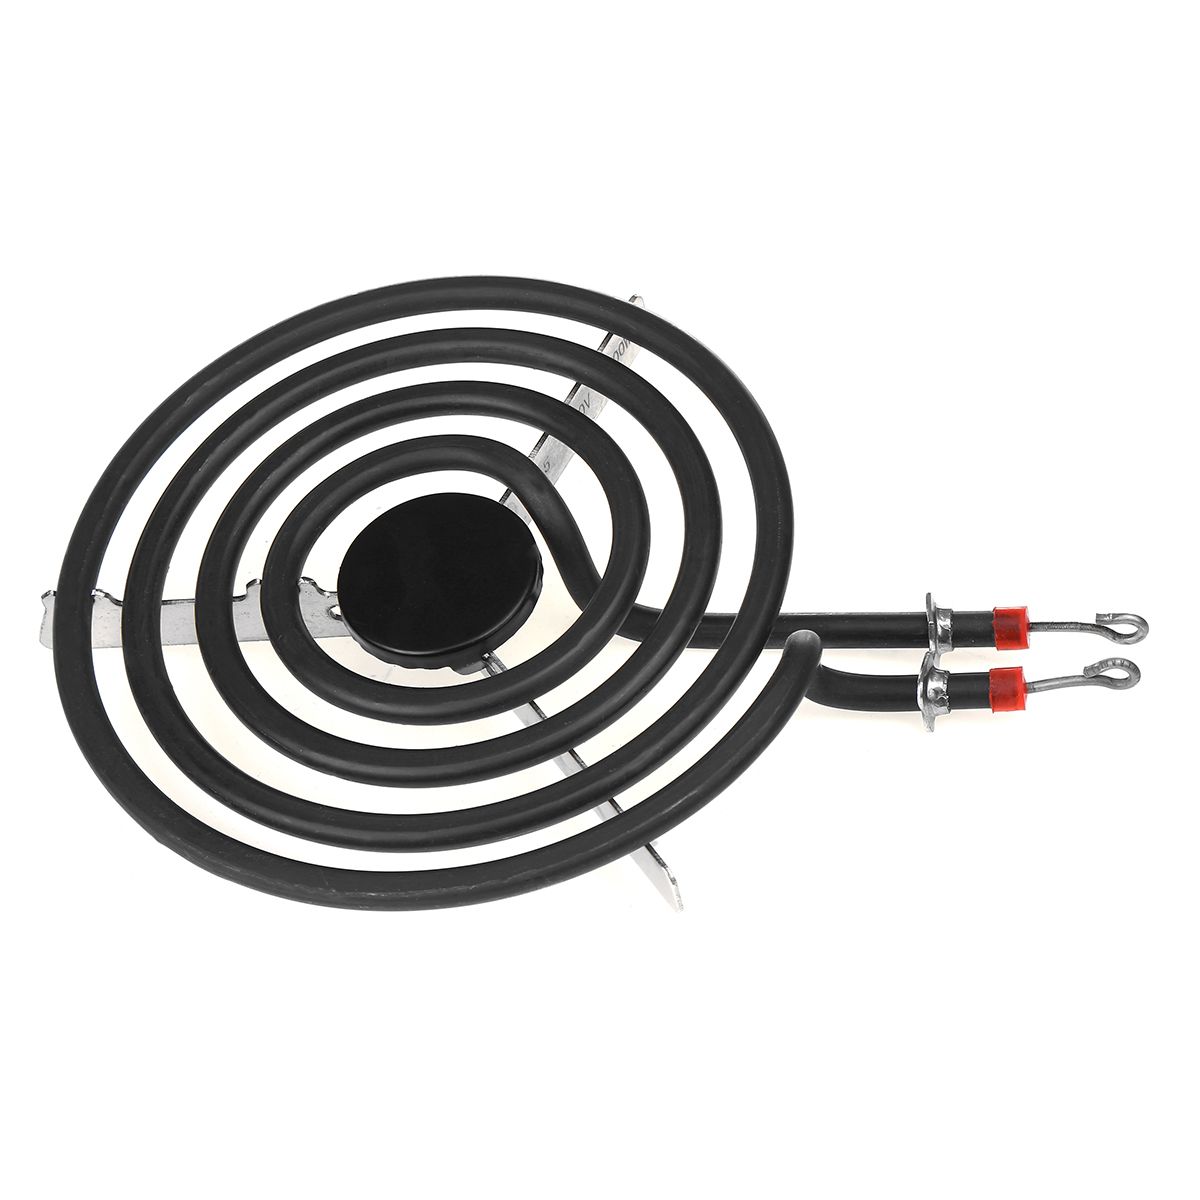 ERS46Y15-7361-Range-Cooktop-Stove-6-Inch-Surface-Burner-Element-For-Whirlpool-Maytag-Cartridge-Heate-1617934